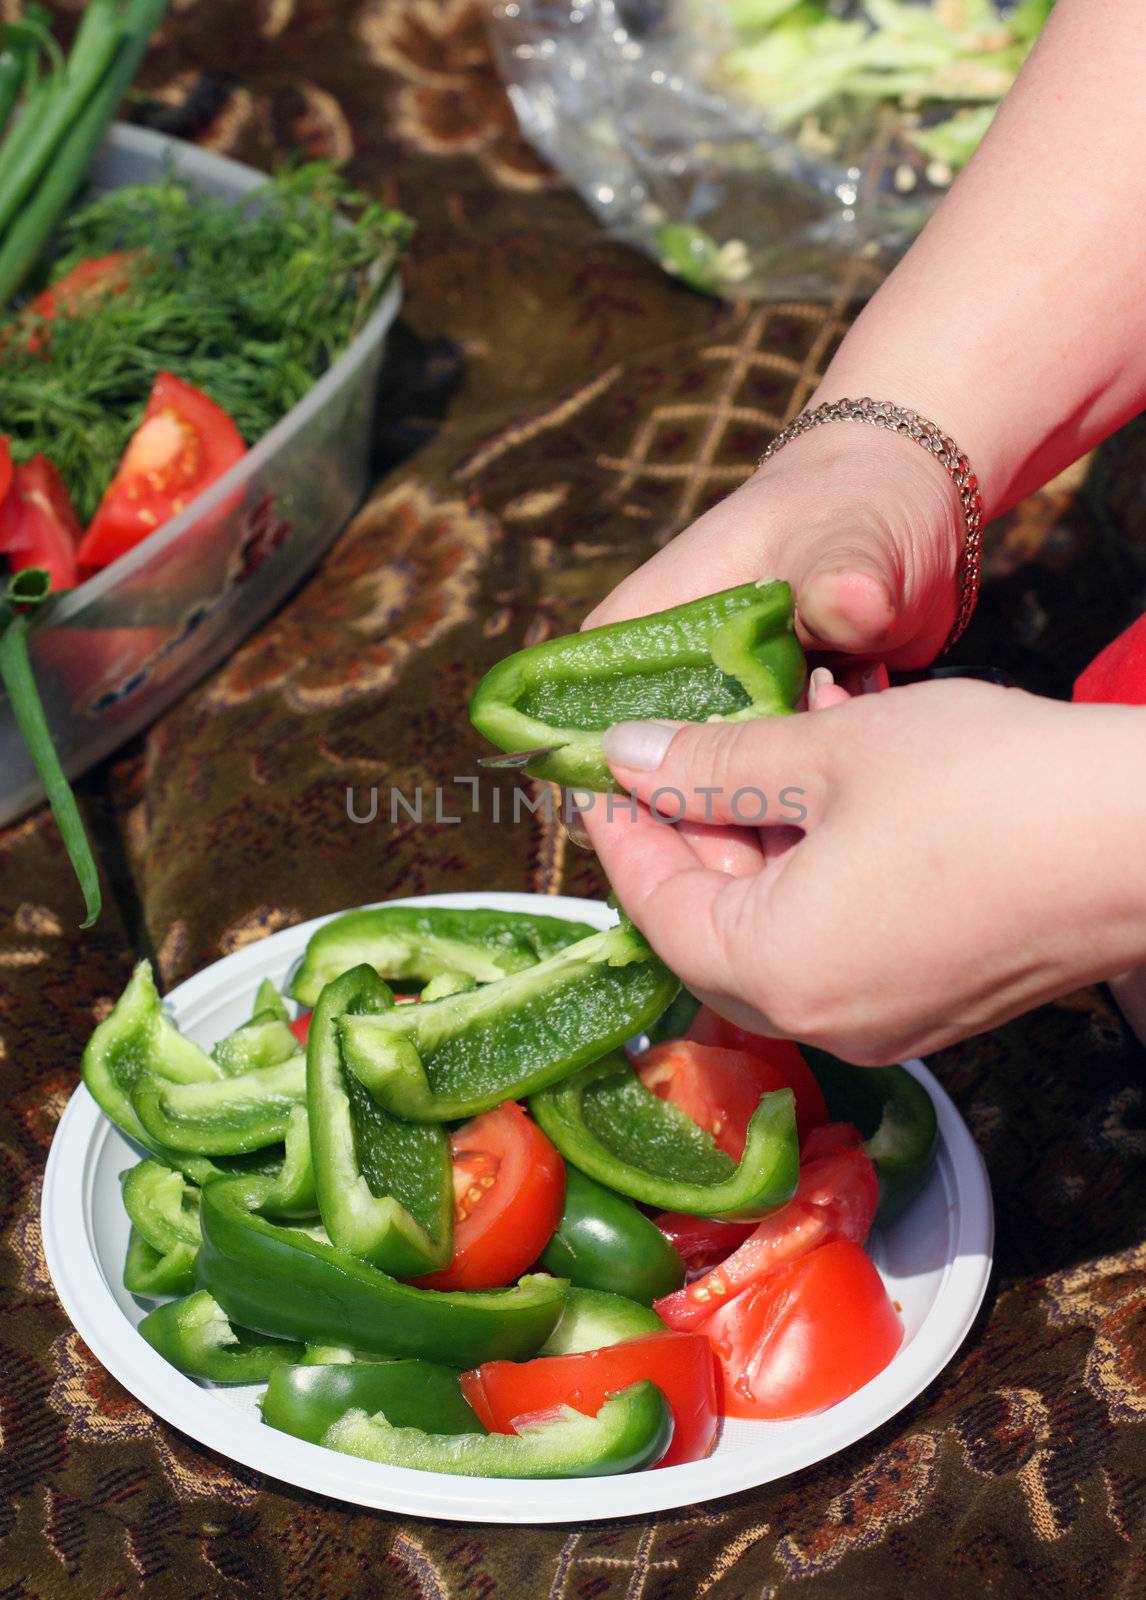 pepper, vegetable, hand, tomato, knife, plate, picnic, fennel, meal, food, vitamins 